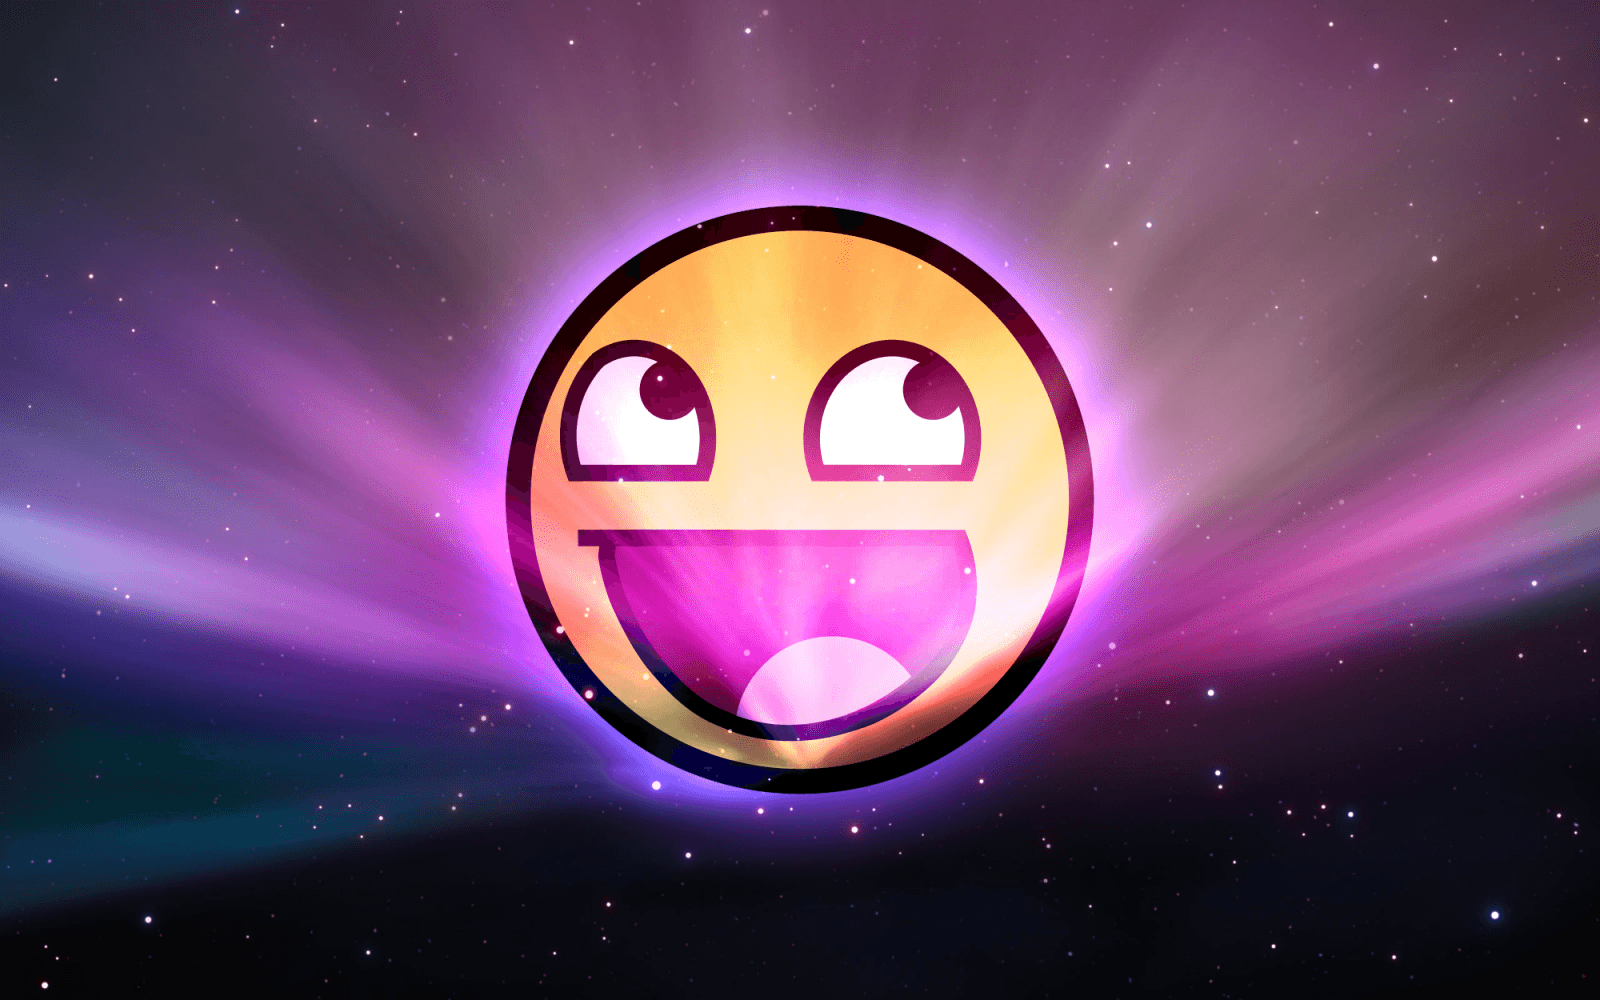 image For > Awesome Smiley Face Wallpaper